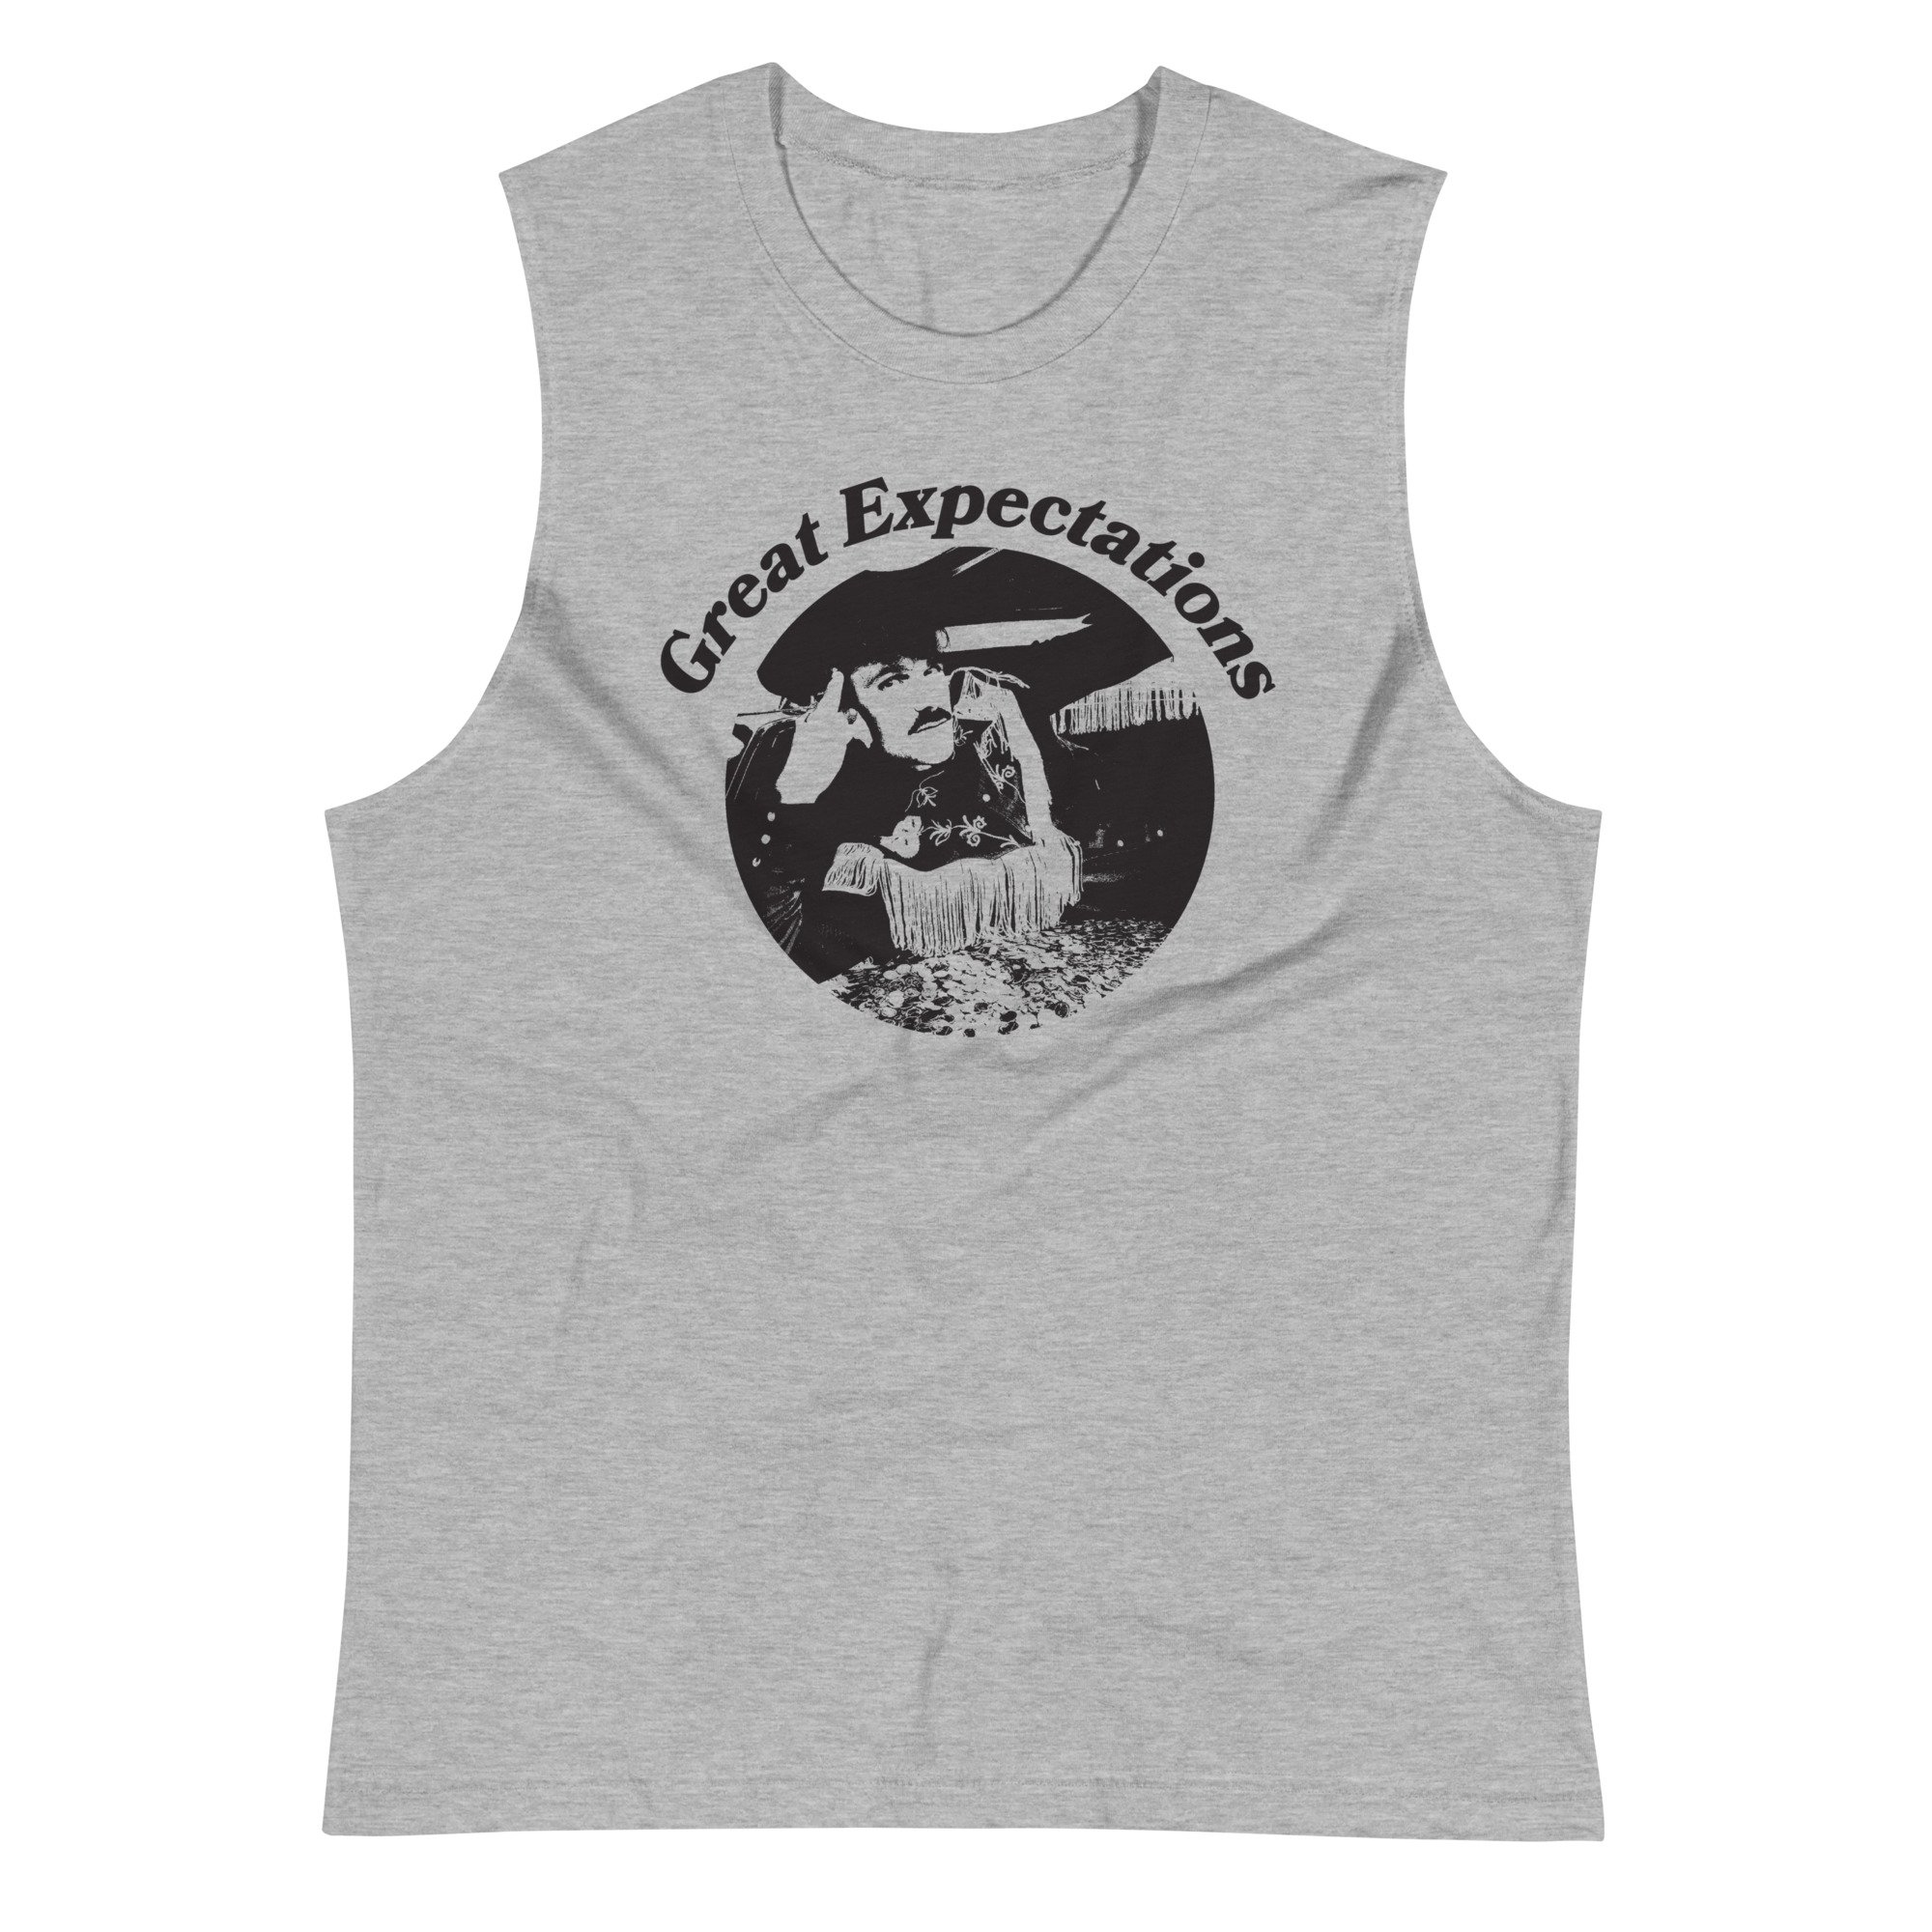 Great Expectations Muscle Tee